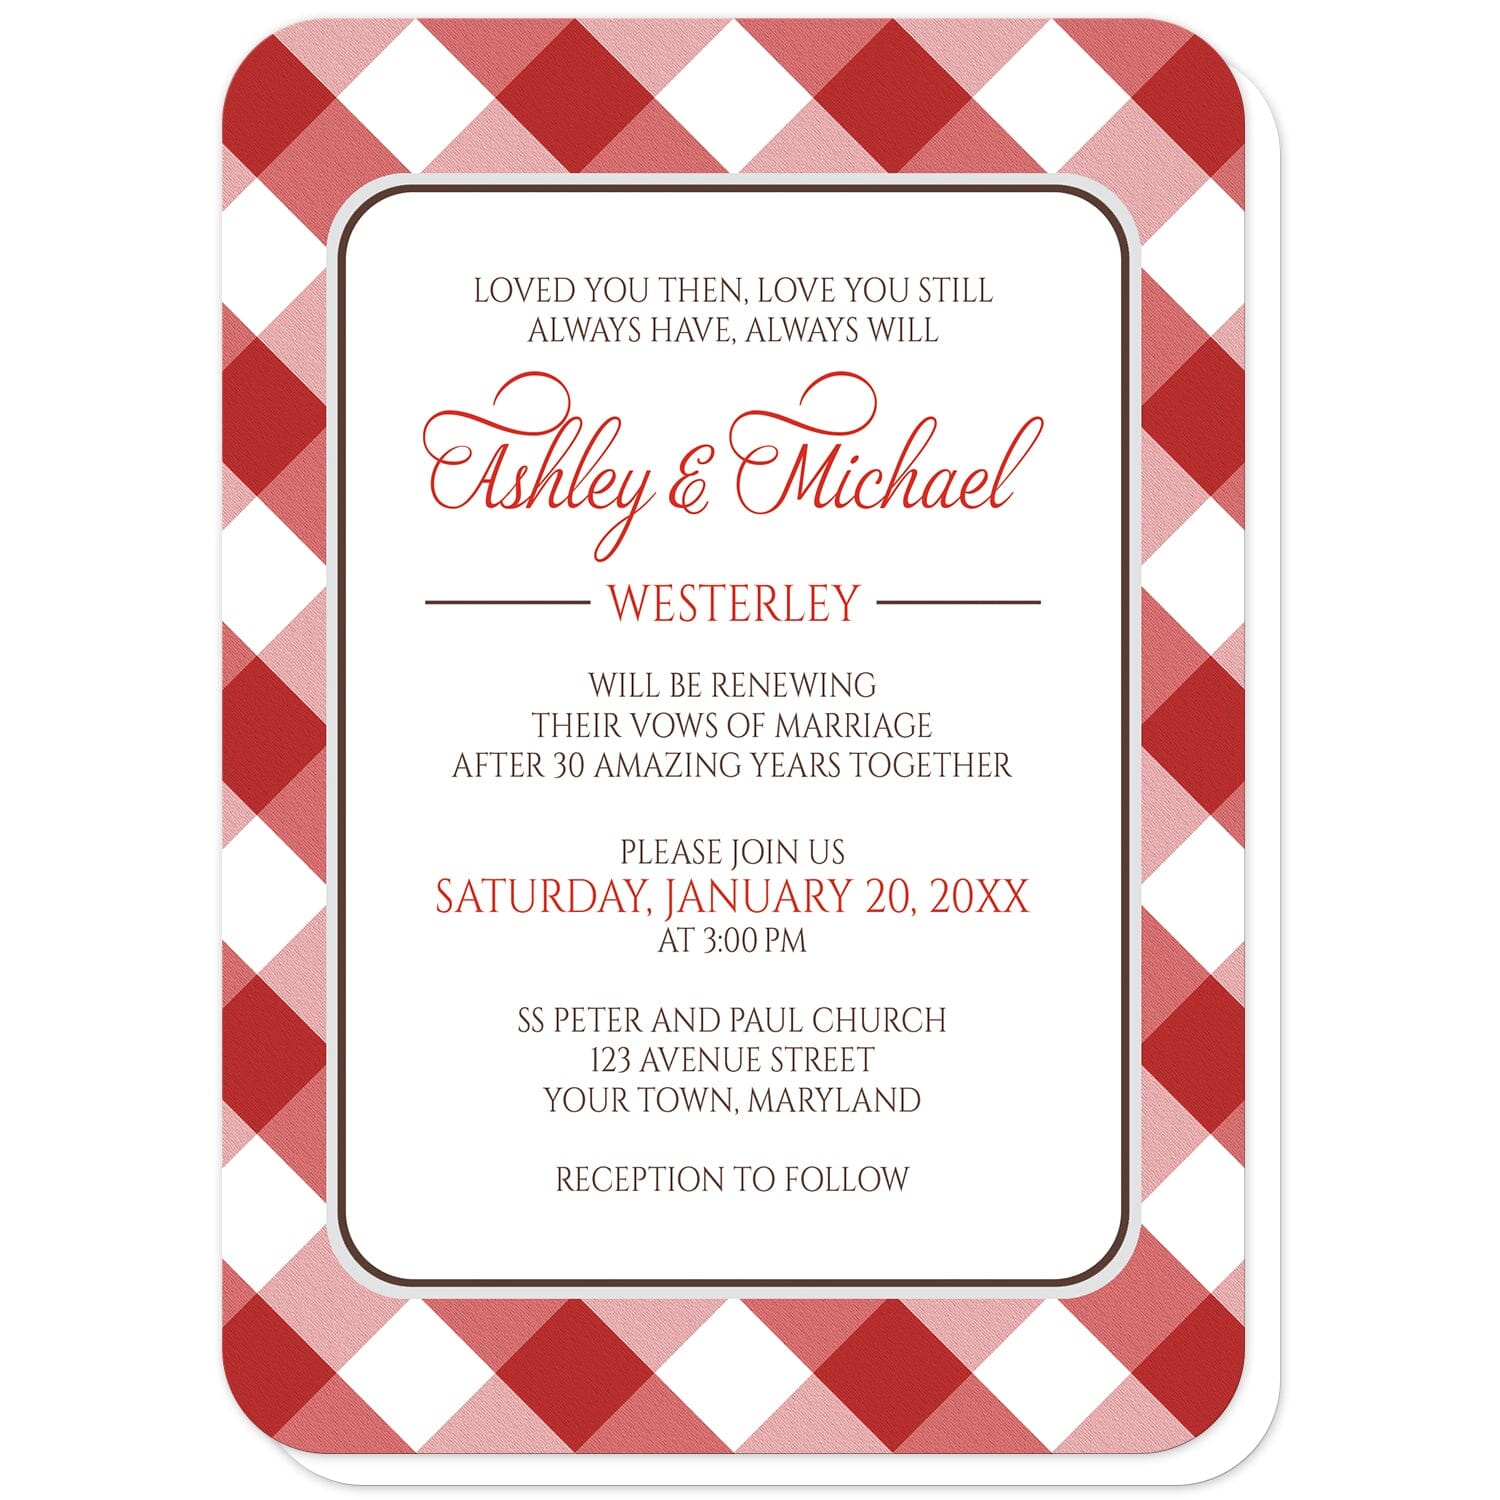 Red Gingham Vow Renewal Invitations (with rounded corners) at Artistically Invited. Red gingham vow renewal invitations with your personalized ceremony details custom printed in red and brown inside a white rectangular area outlined in brown and light gray. The background design is a diagonal red and white gingham pattern. 